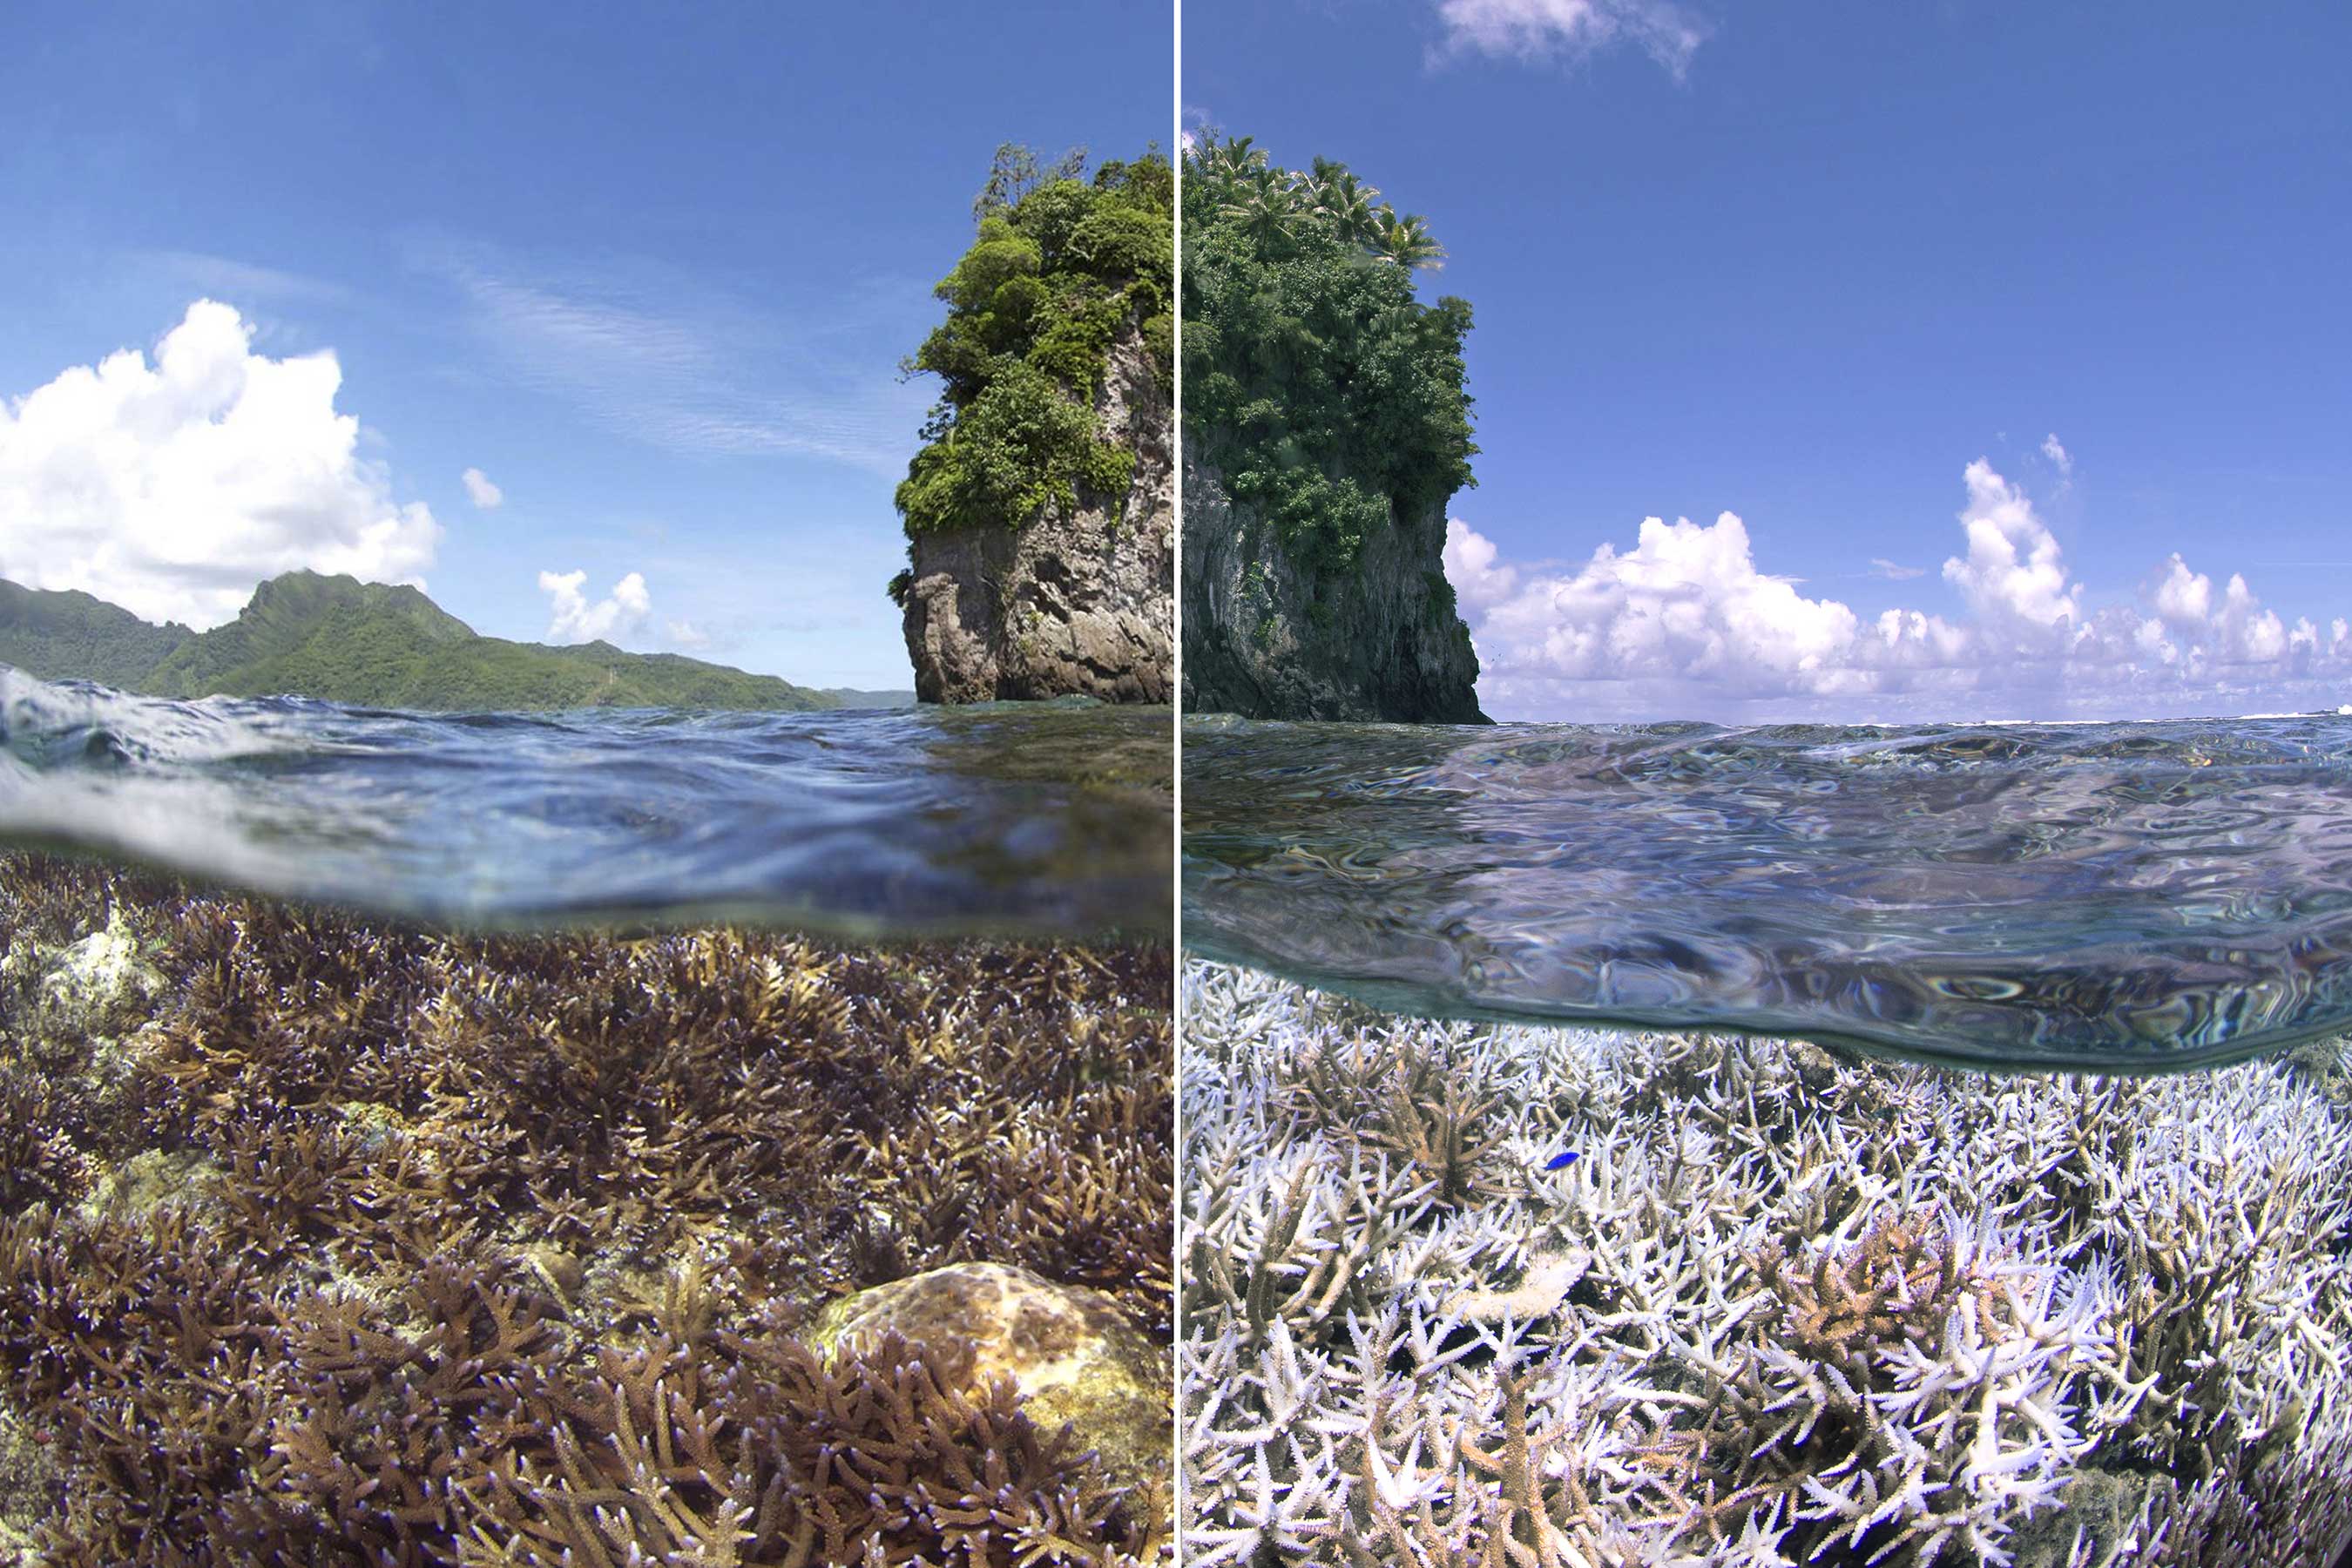 A before and after image of the coral bleaching in American Samoa. The first image was taken in December 2014. The second image was taken in February 2015.  The Ocean Agency / XL Catlin Seaview Survey / Richard Vevers and Christophe Bailhache